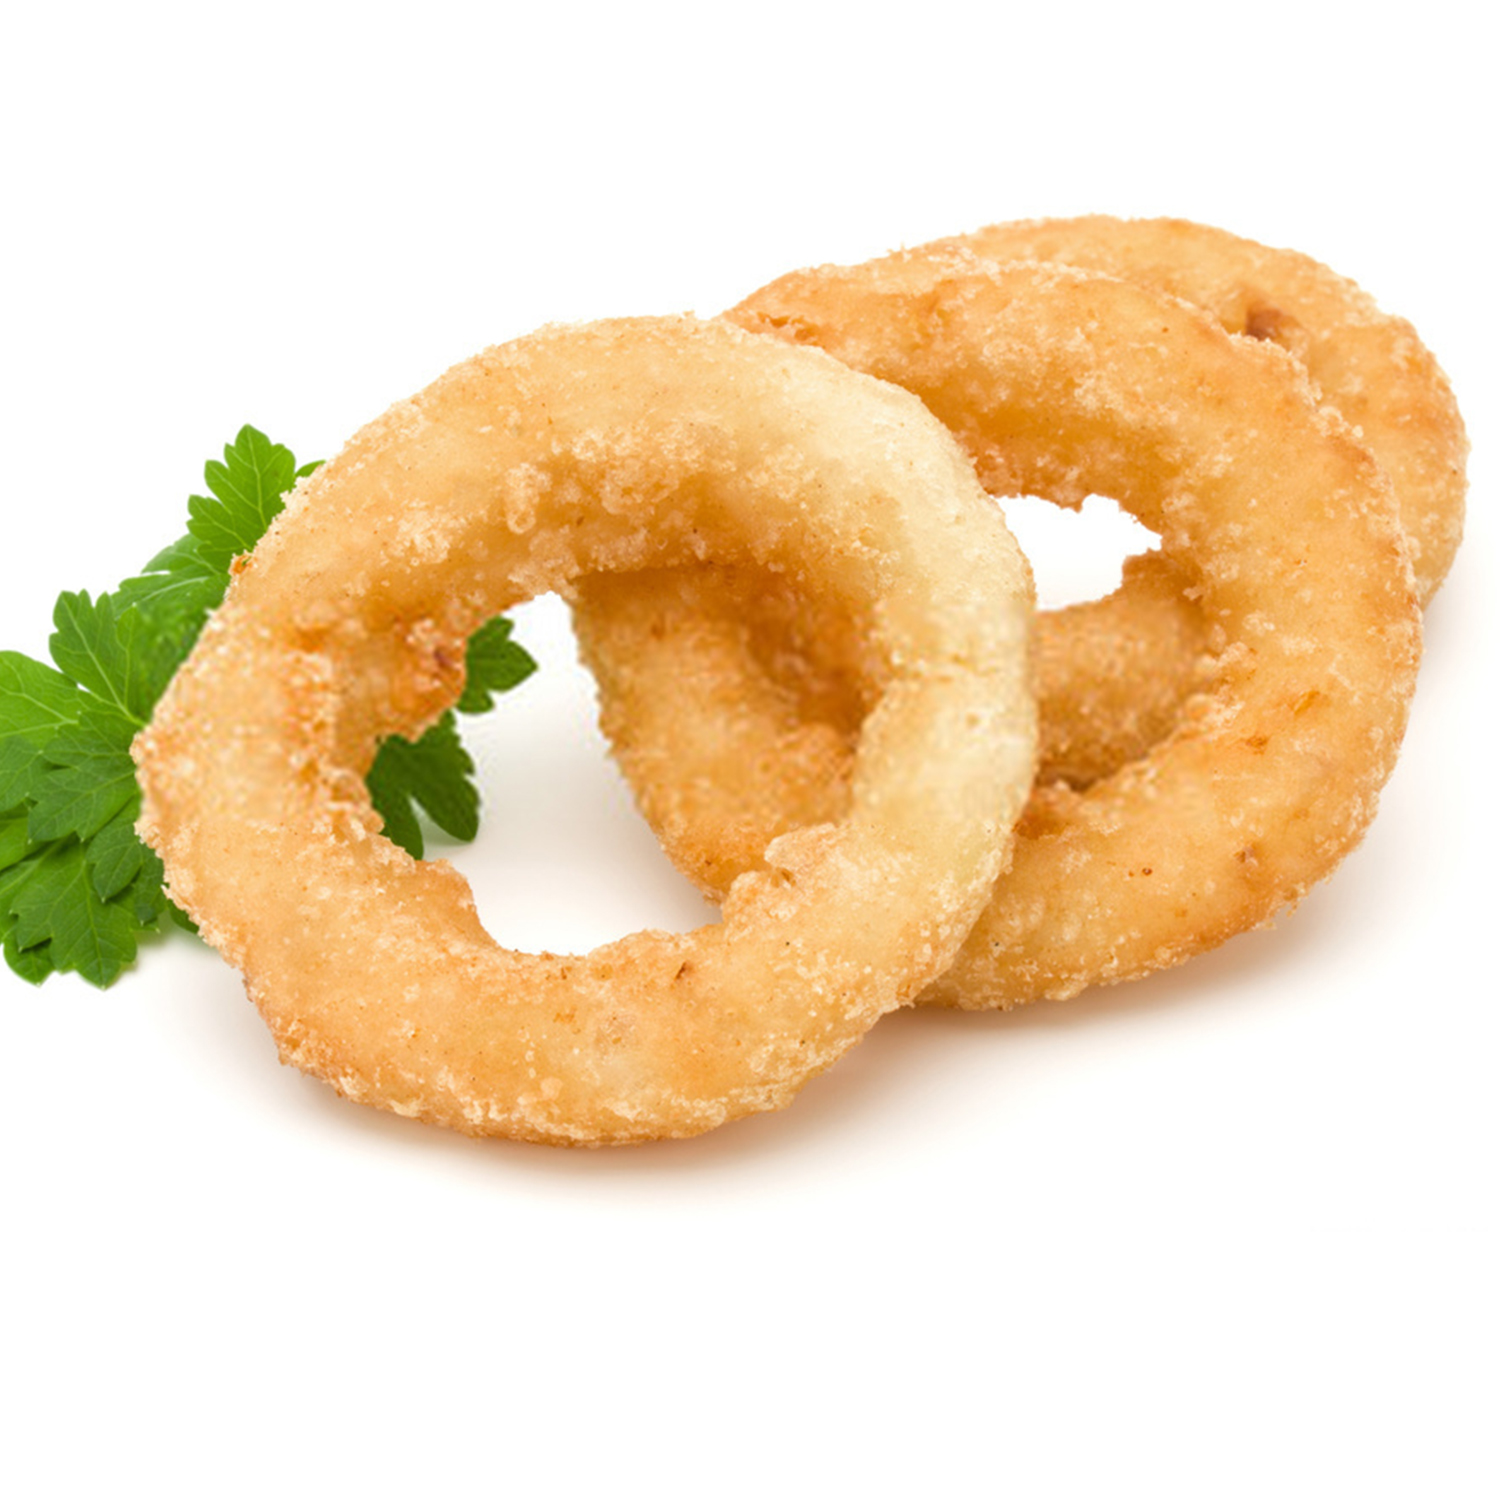 Fried squid rings breaded with lemon on a plate - Stock Photo [88050613] -  PIXTA